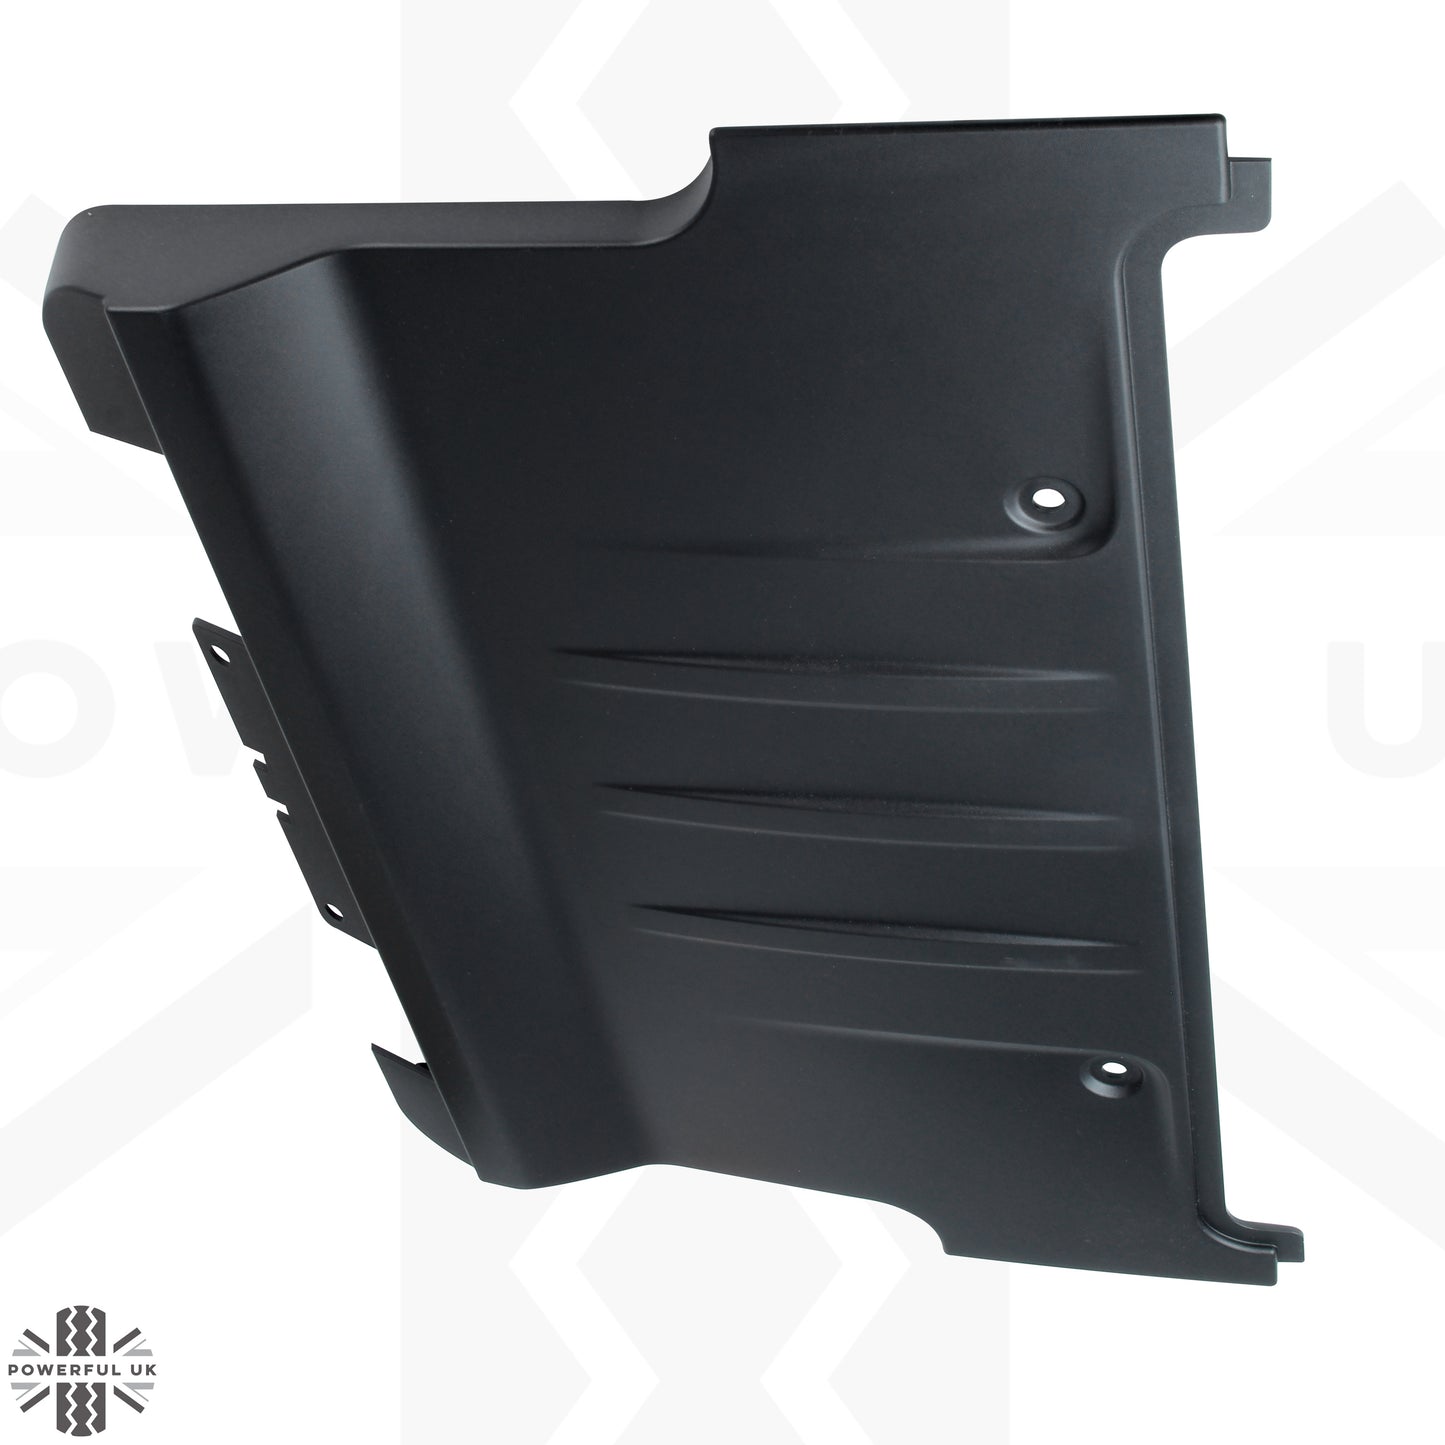 Rear Undertray for Range Rover L405 2018-2021 - Aftermarket